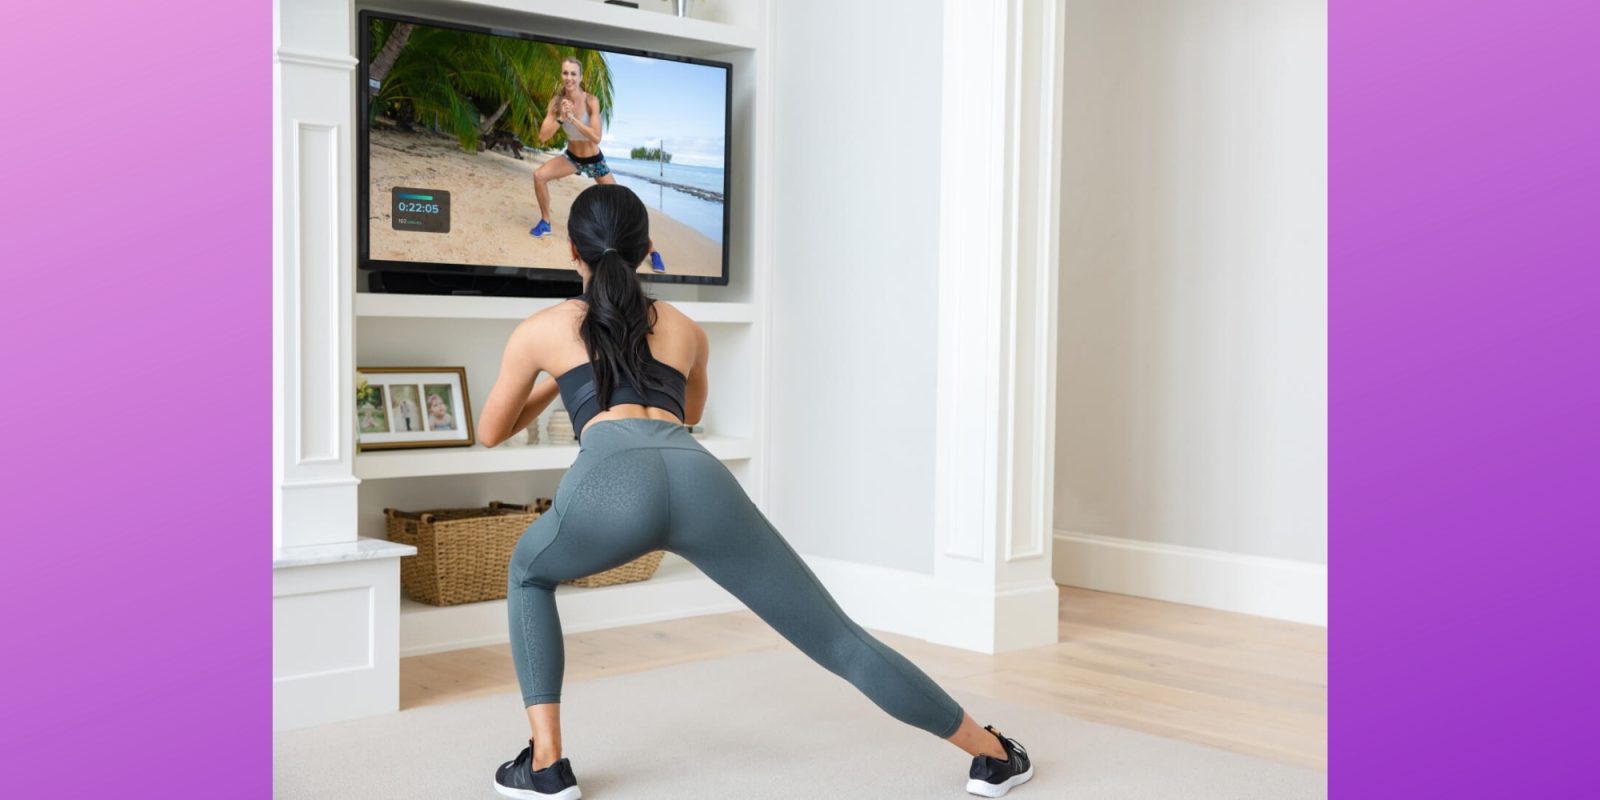 iFIT At-Home Workout & Fitness dans l'App Store